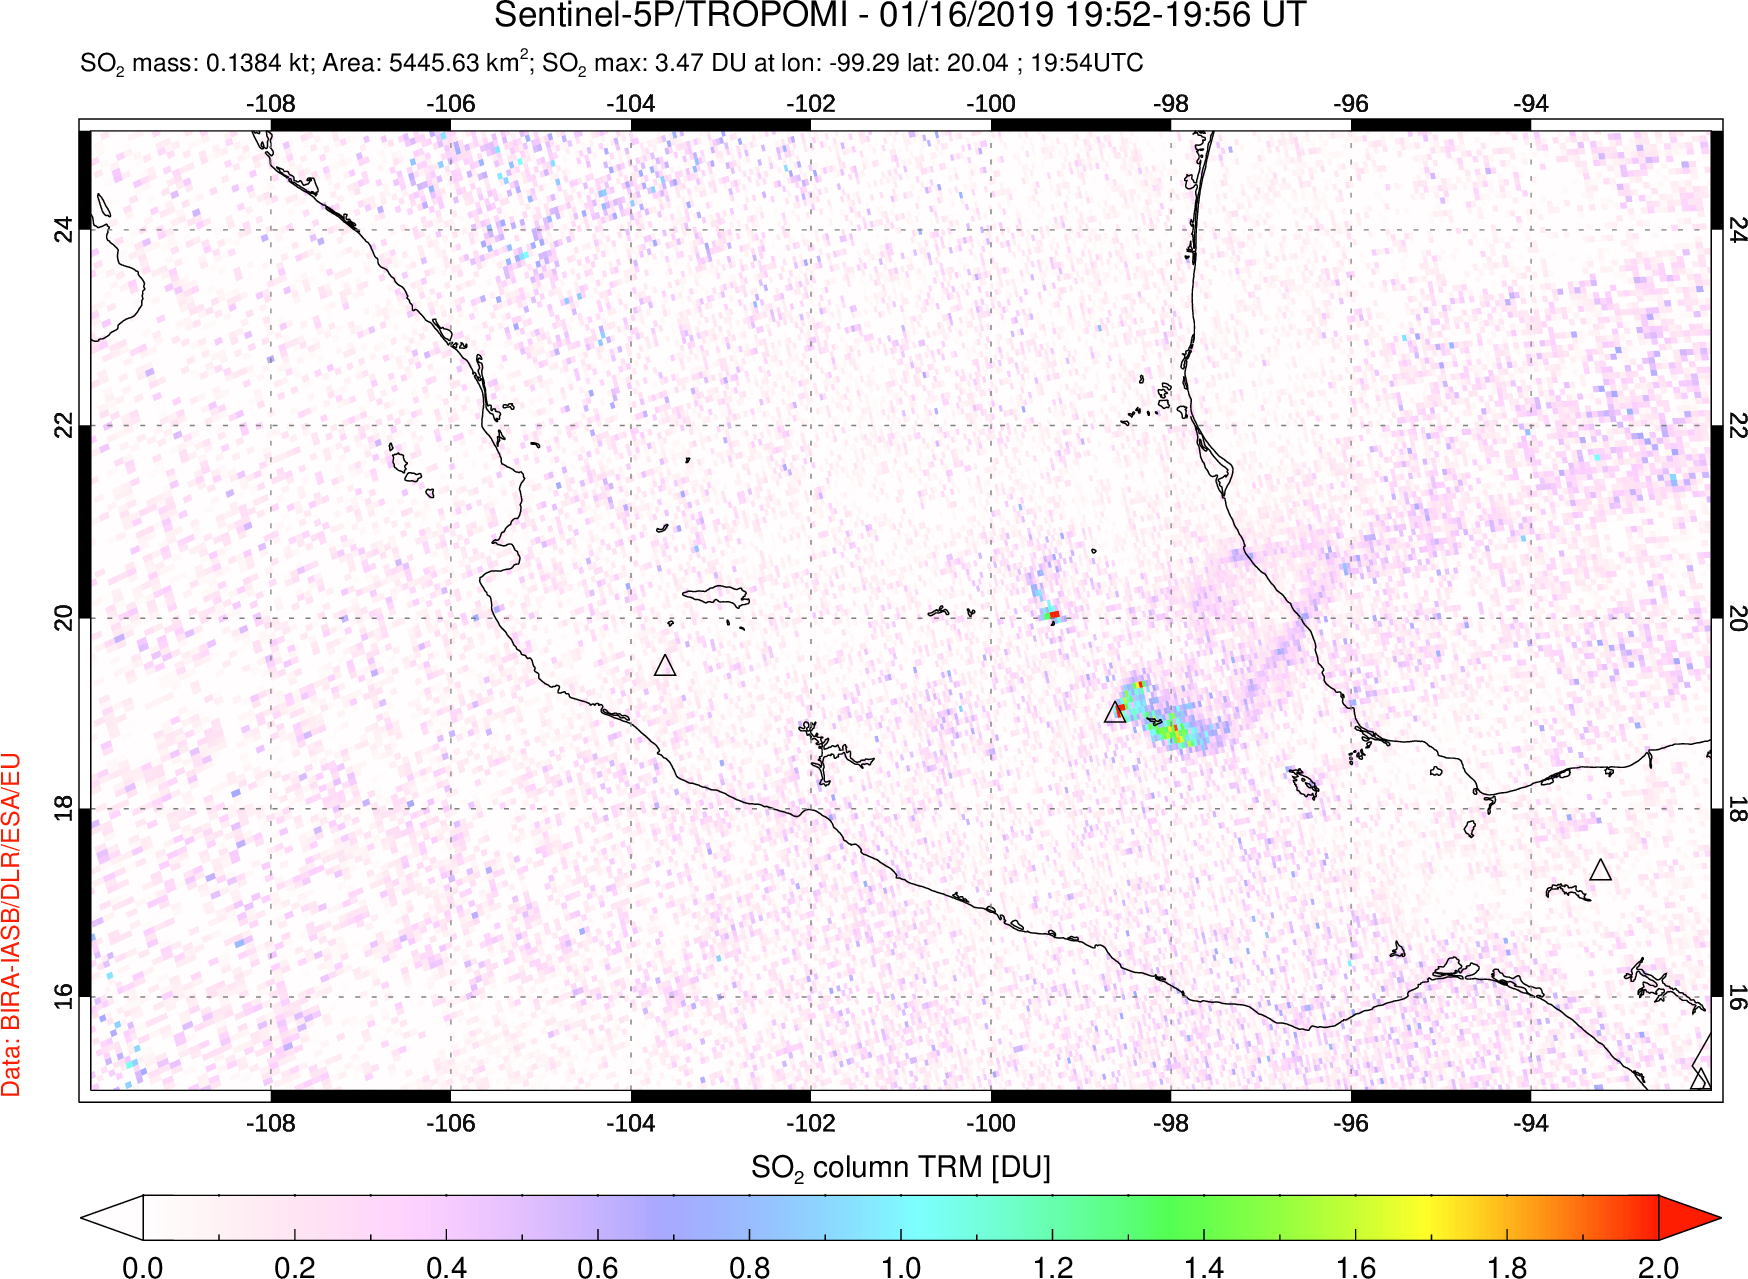 A sulfur dioxide image over Mexico on Jan 16, 2019.